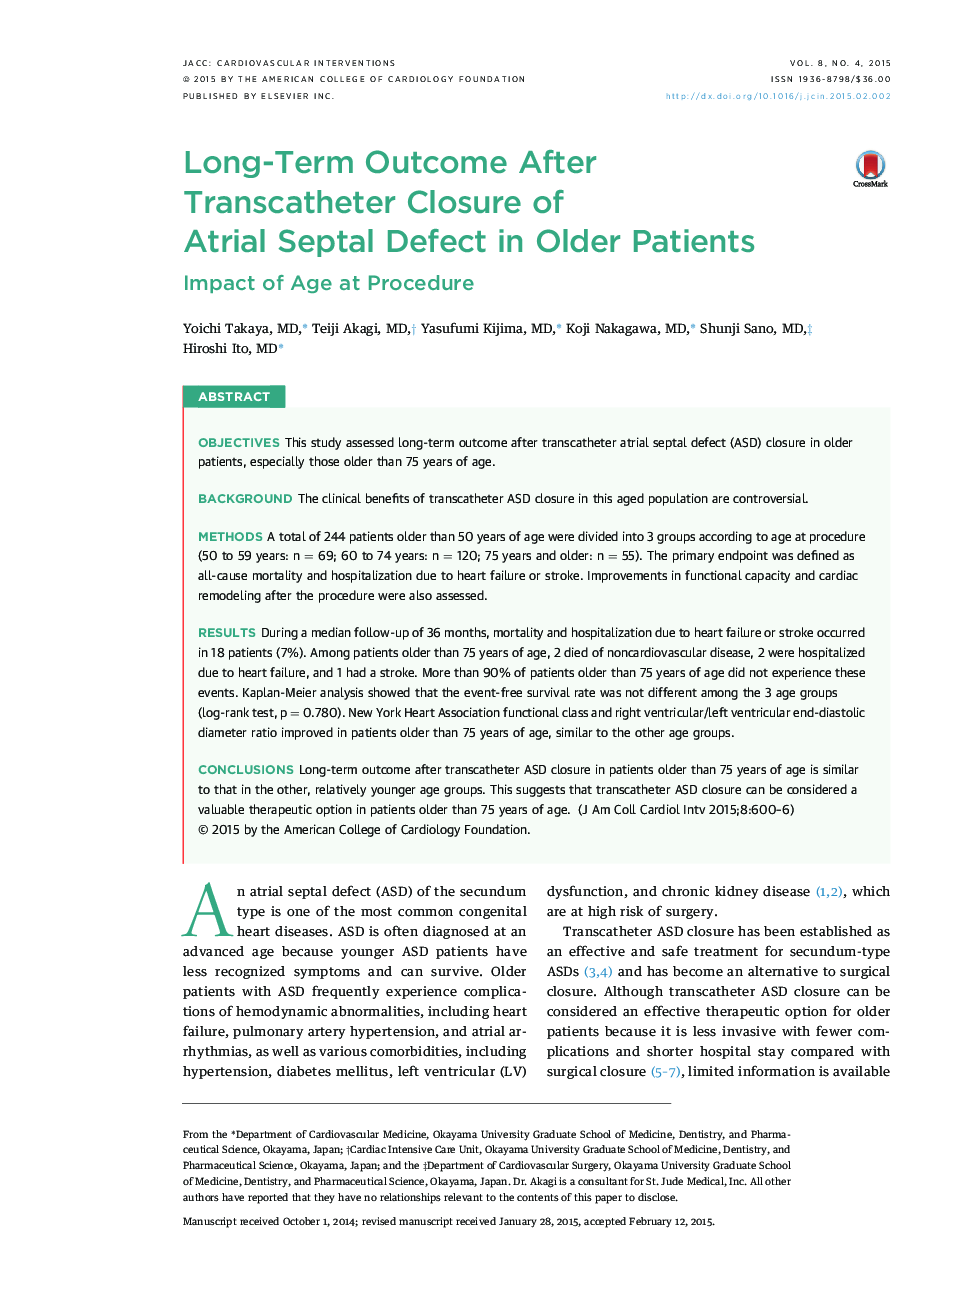 Long-Term Outcome After Transcatheter Closure of Atrial Septal Defect in Older Patients : Impact of Age at Procedure